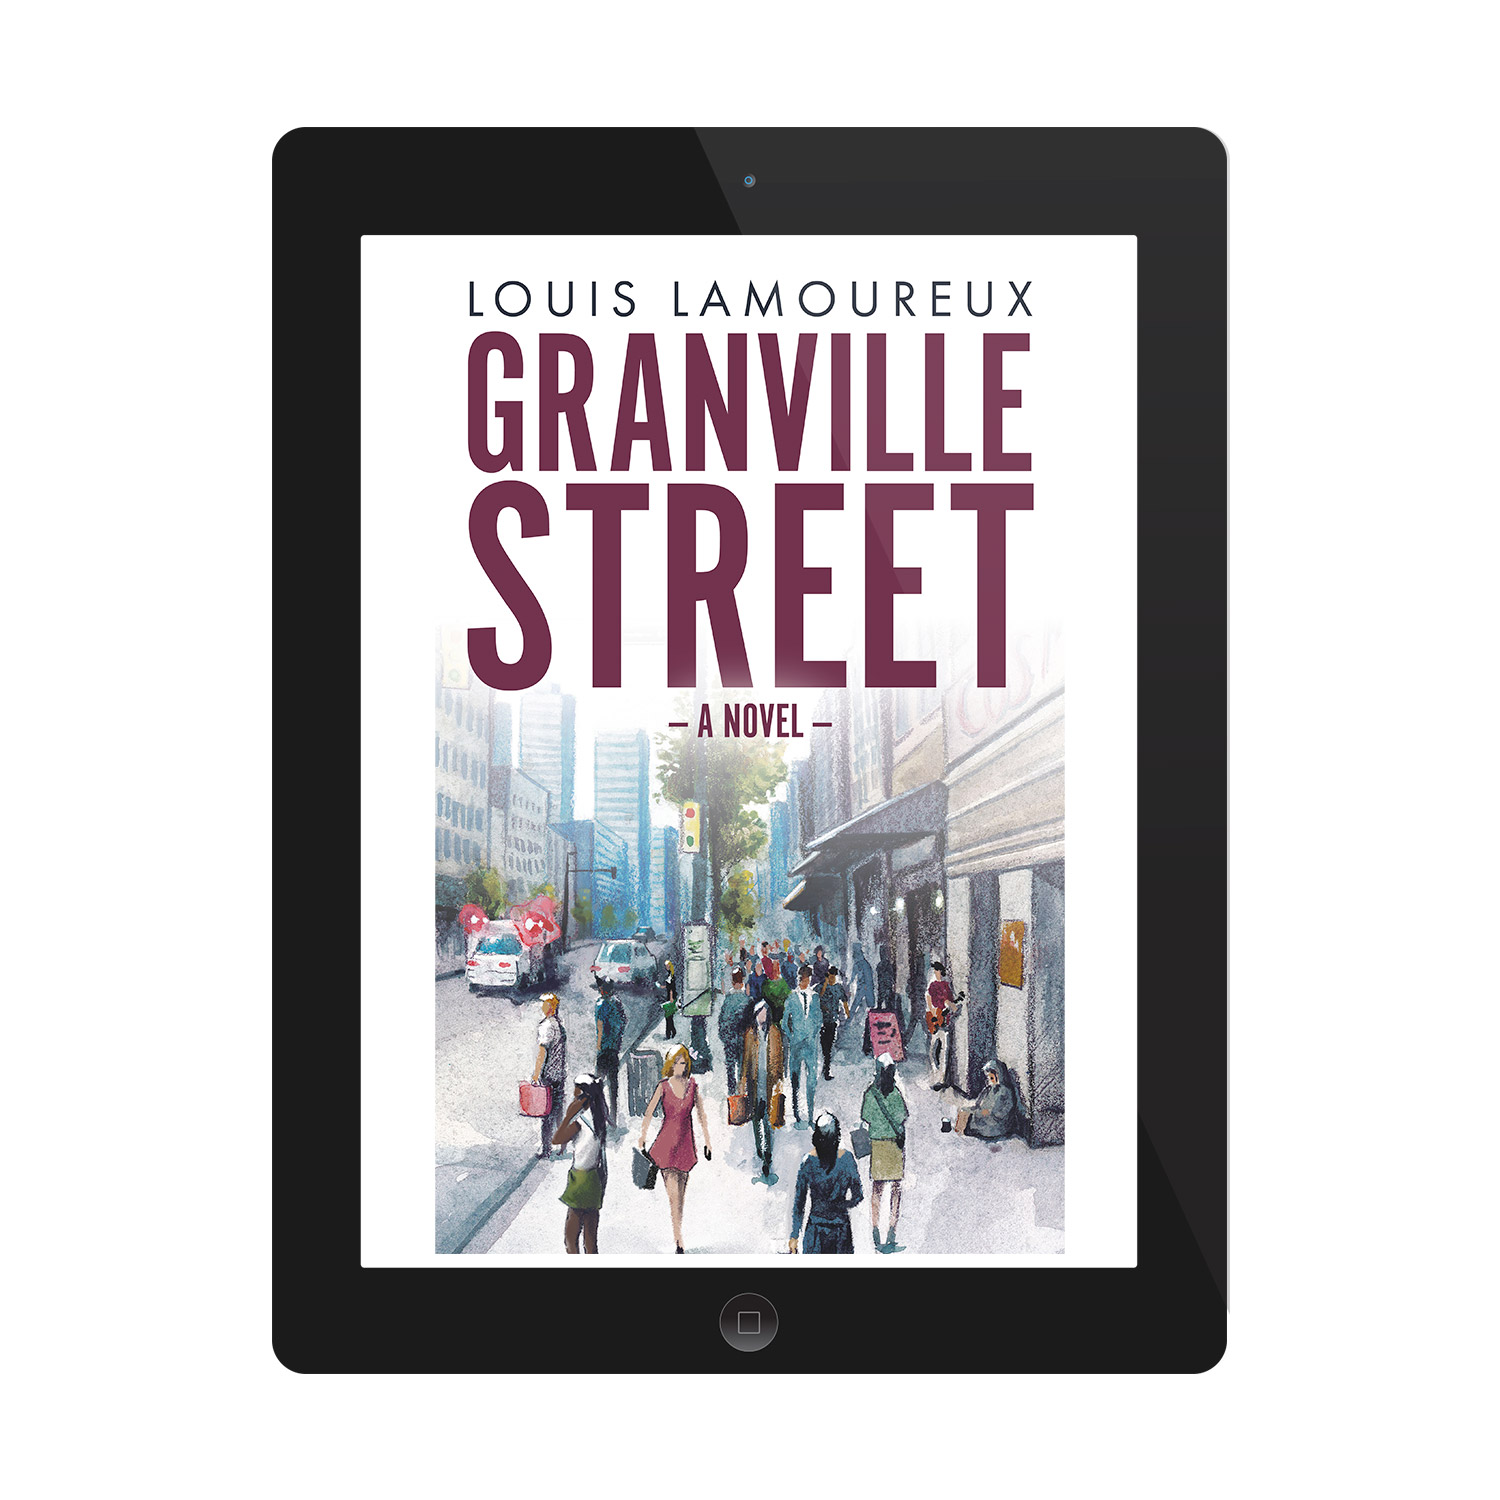 'Granville Street' is a heartbreaking novel of opioid addiction and loss. The author is Louis Lamoureux. The cover design and interior manuscript formatting are by Mark Thomas. Learn what Mark could do for your book by visiting coverness.com.